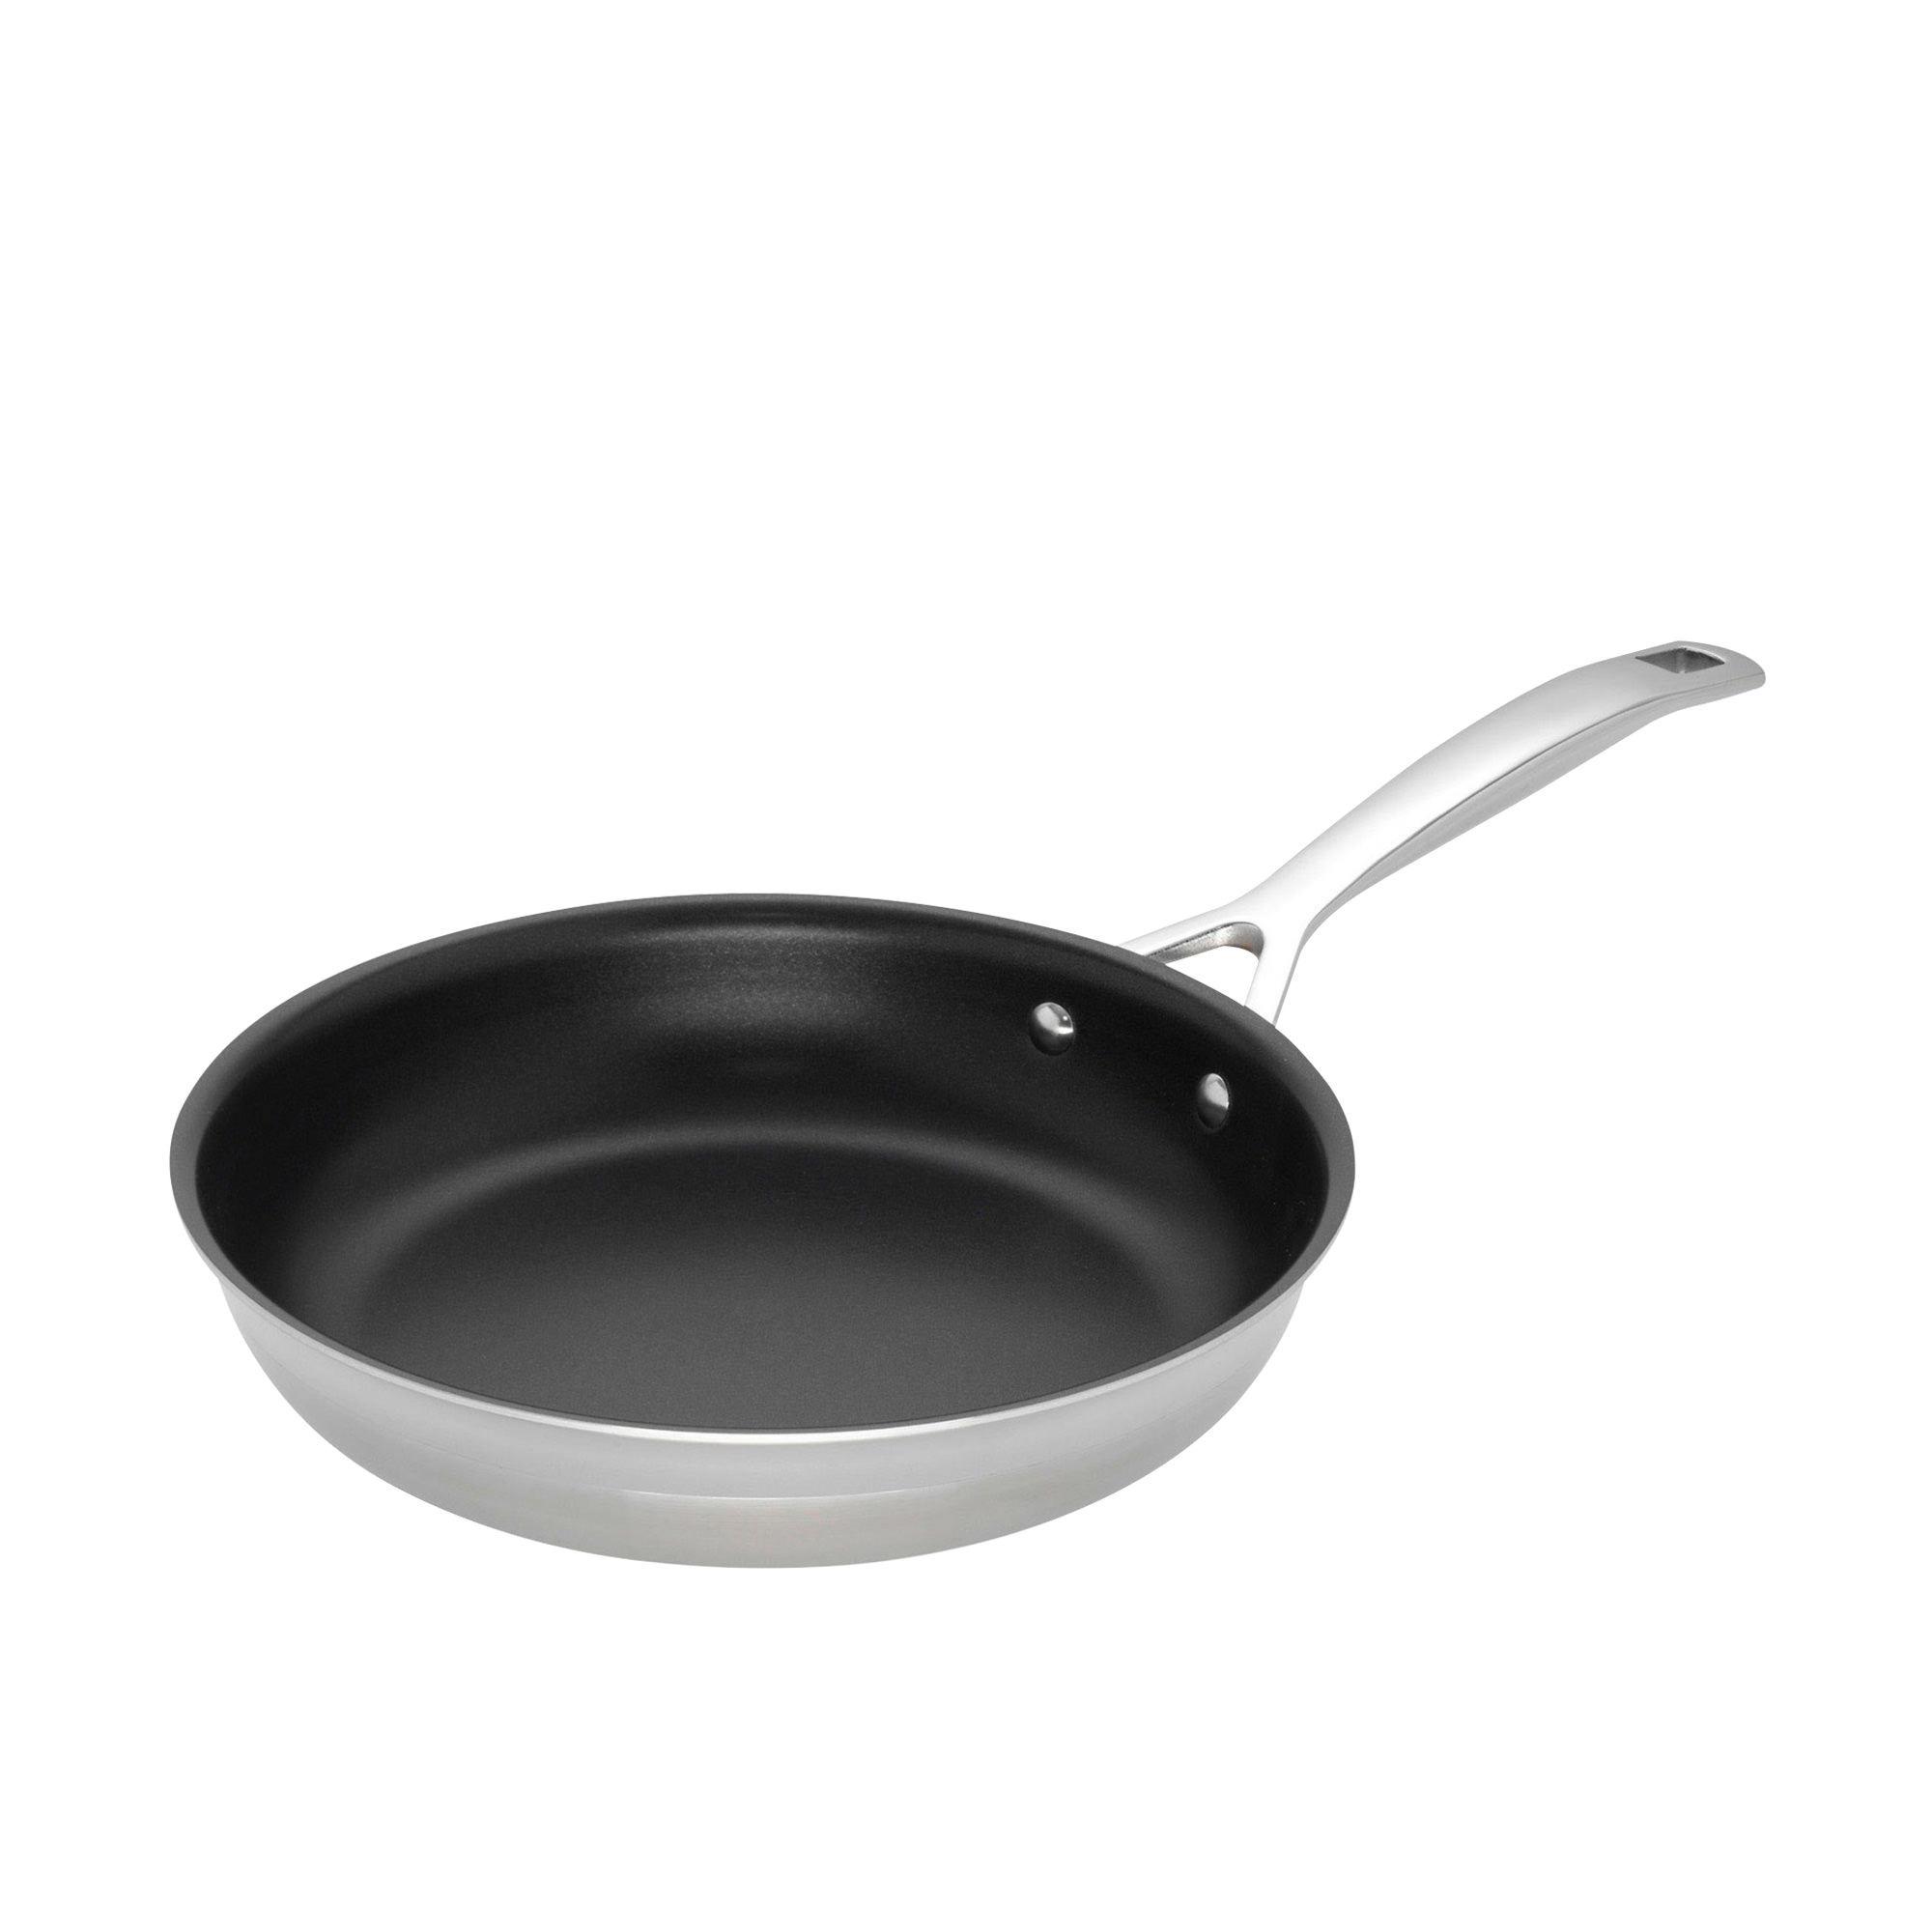 Le Creuset 3-Ply Stainless Steel Frypan 30cm Image 1